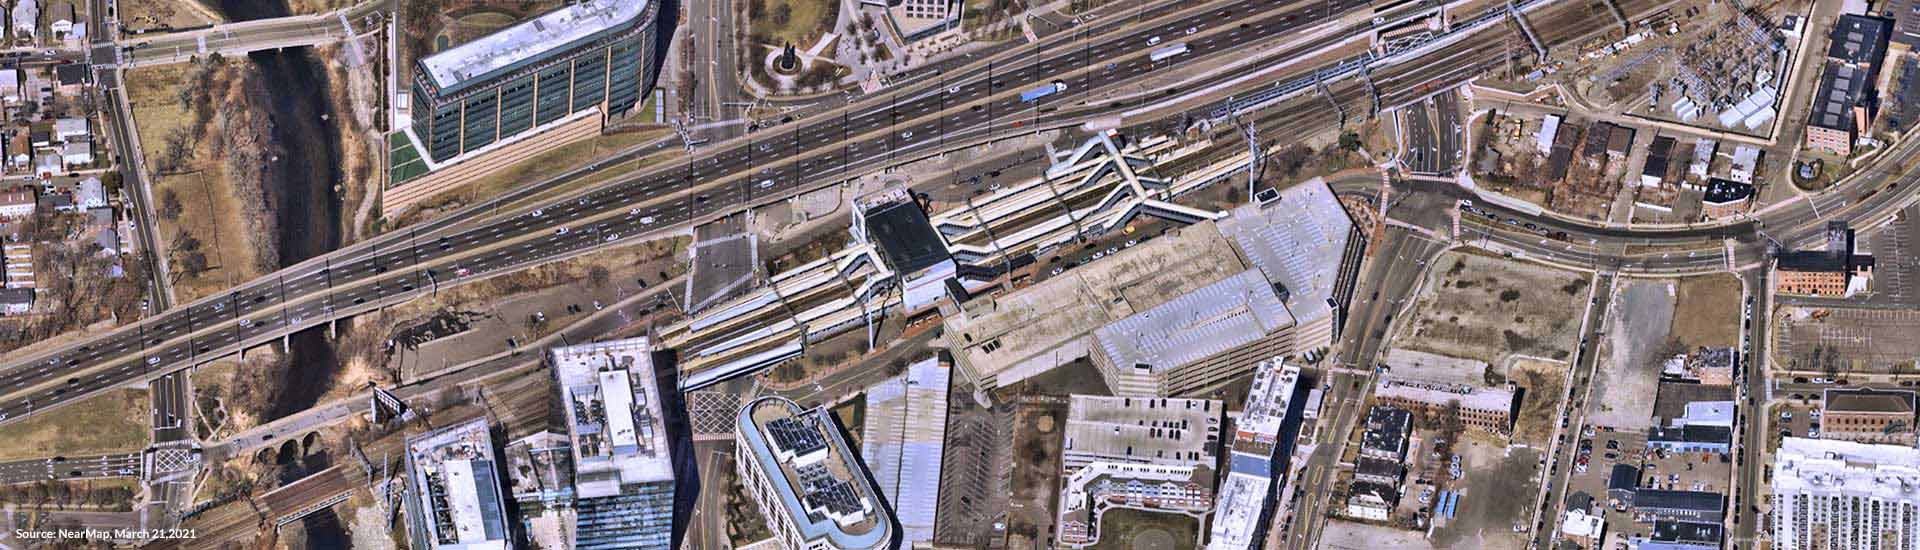 Oblique aerial view of existing STC, parking garage, adjacent buildings, and highway with traveling cars and trucks.